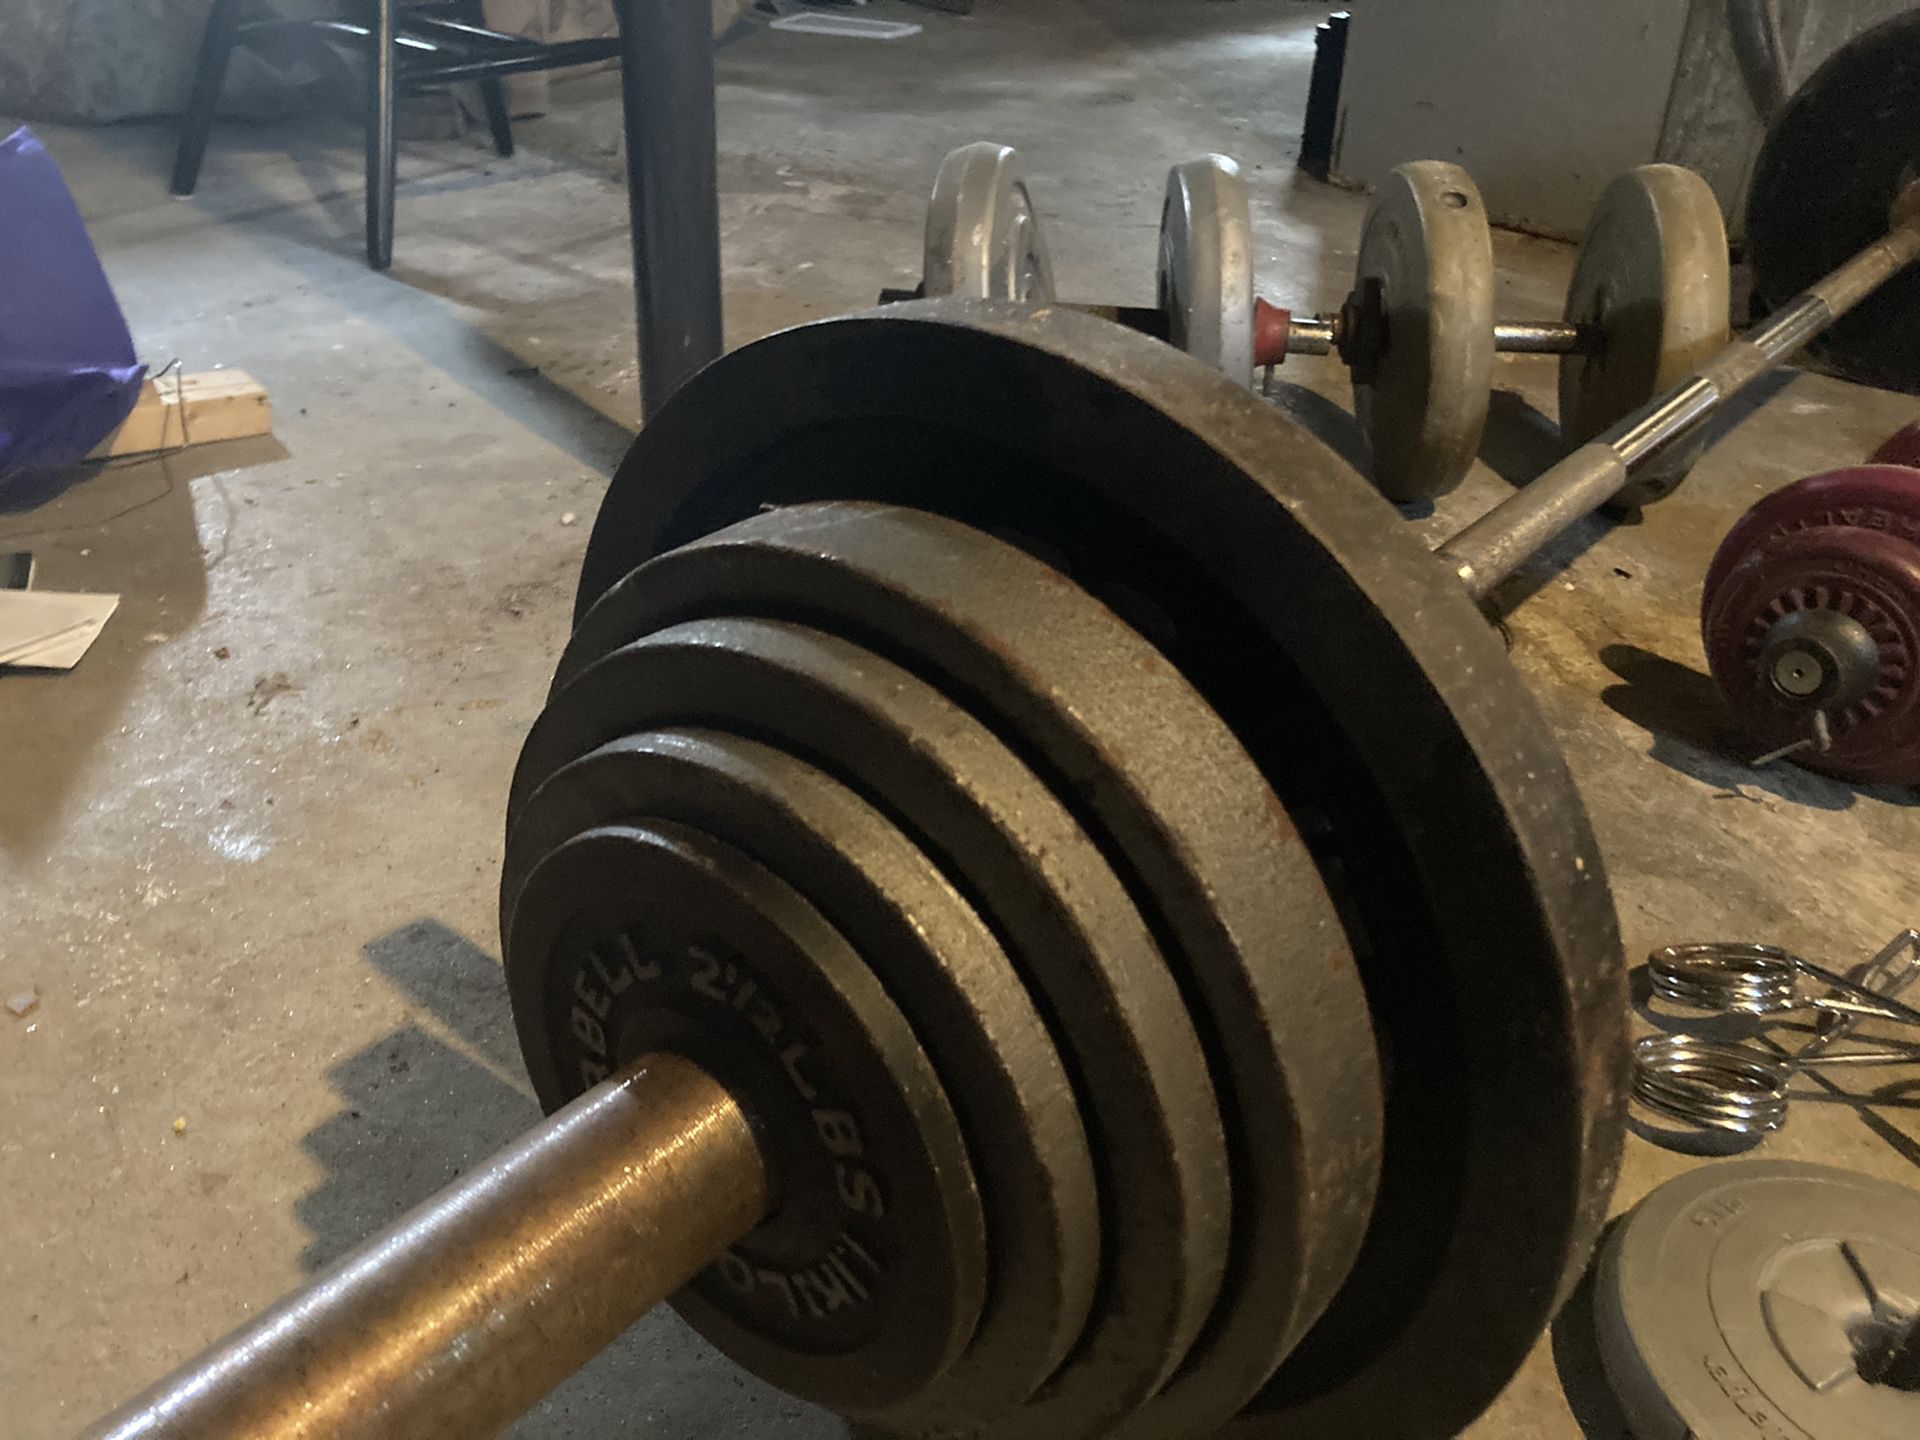 Steel weights Olympic bar, bench and miscellaneous other weights